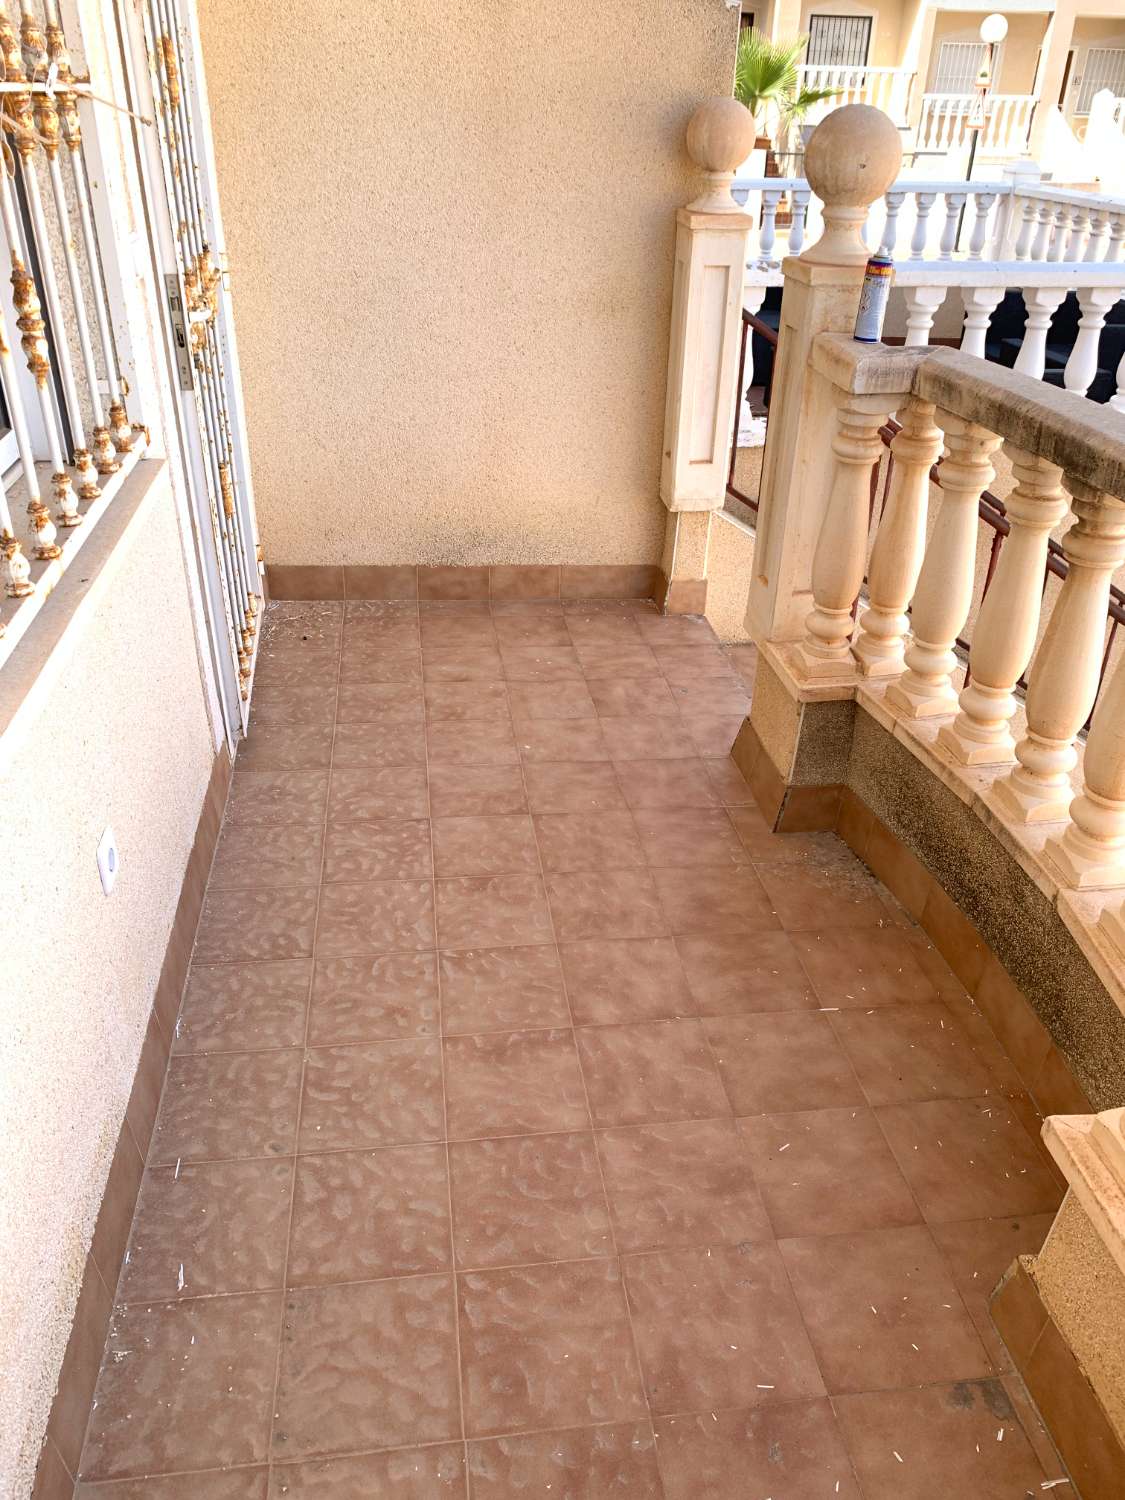 MAKE YOUR OFFER!! 2 BEDROOM DUPLEX HOUSE WITH SOLARIUM AND POOL!!